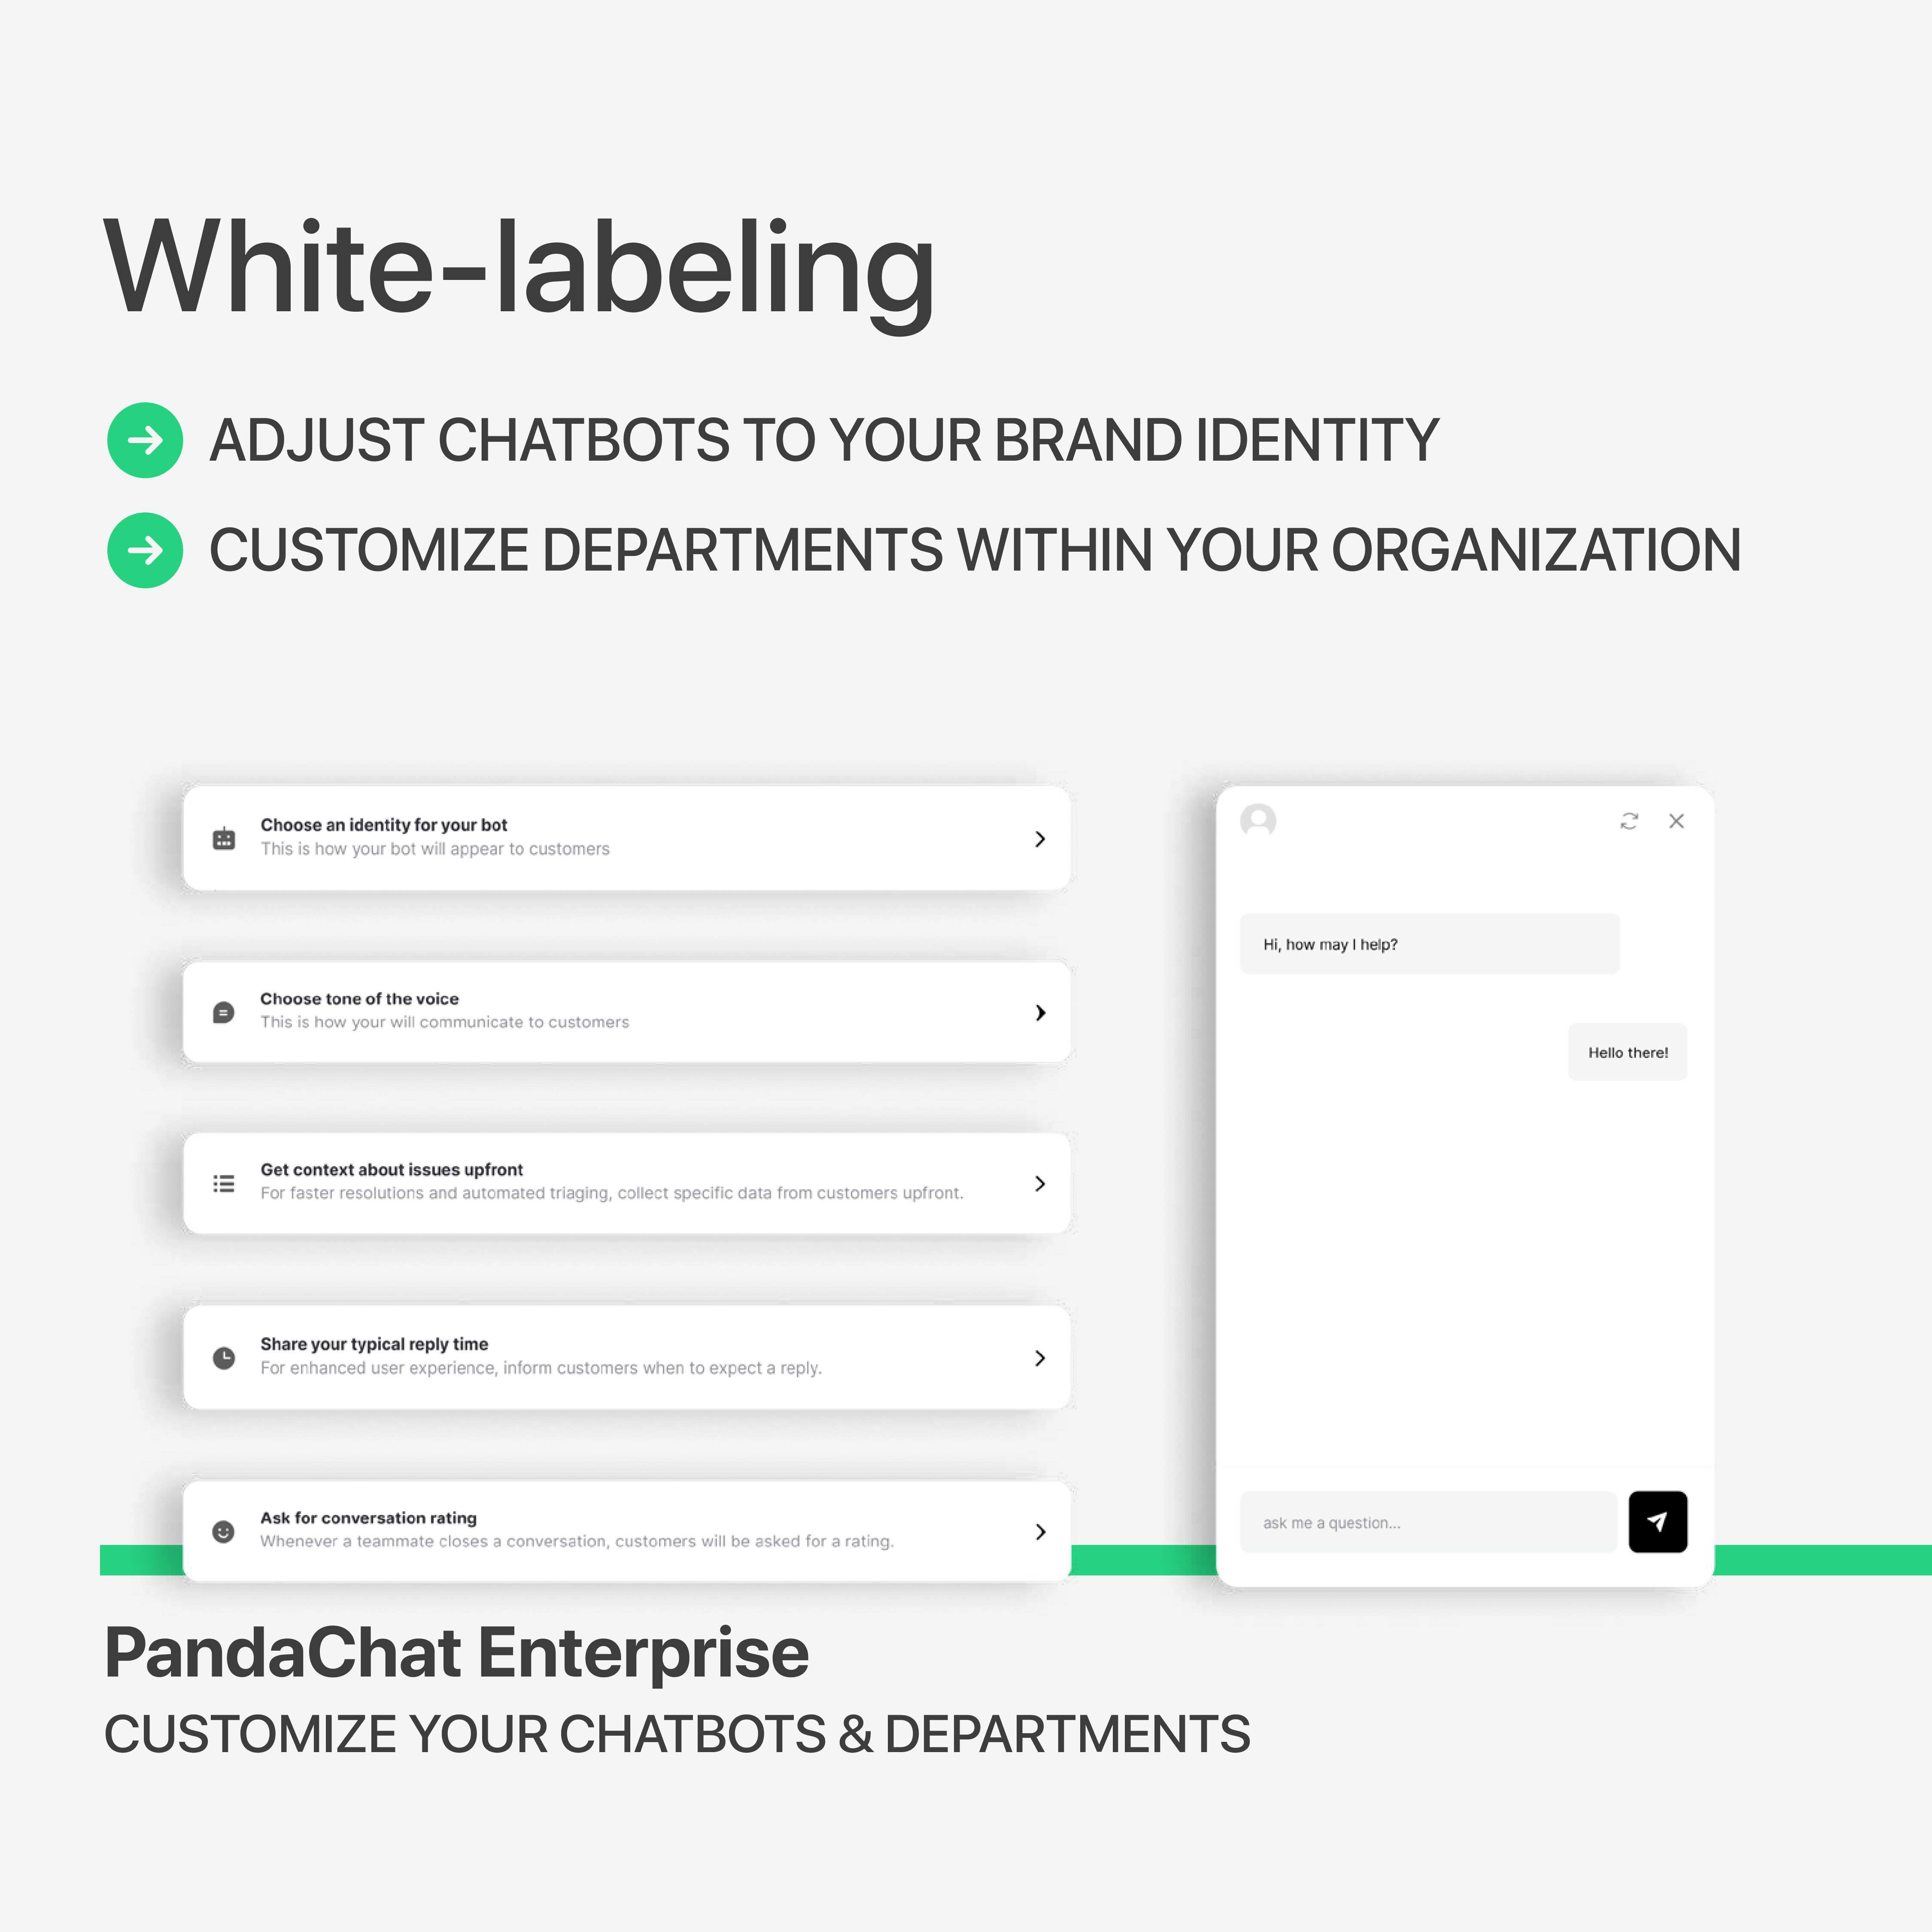 Elevate Your Brand with PandaChat Live's White-labeling Features